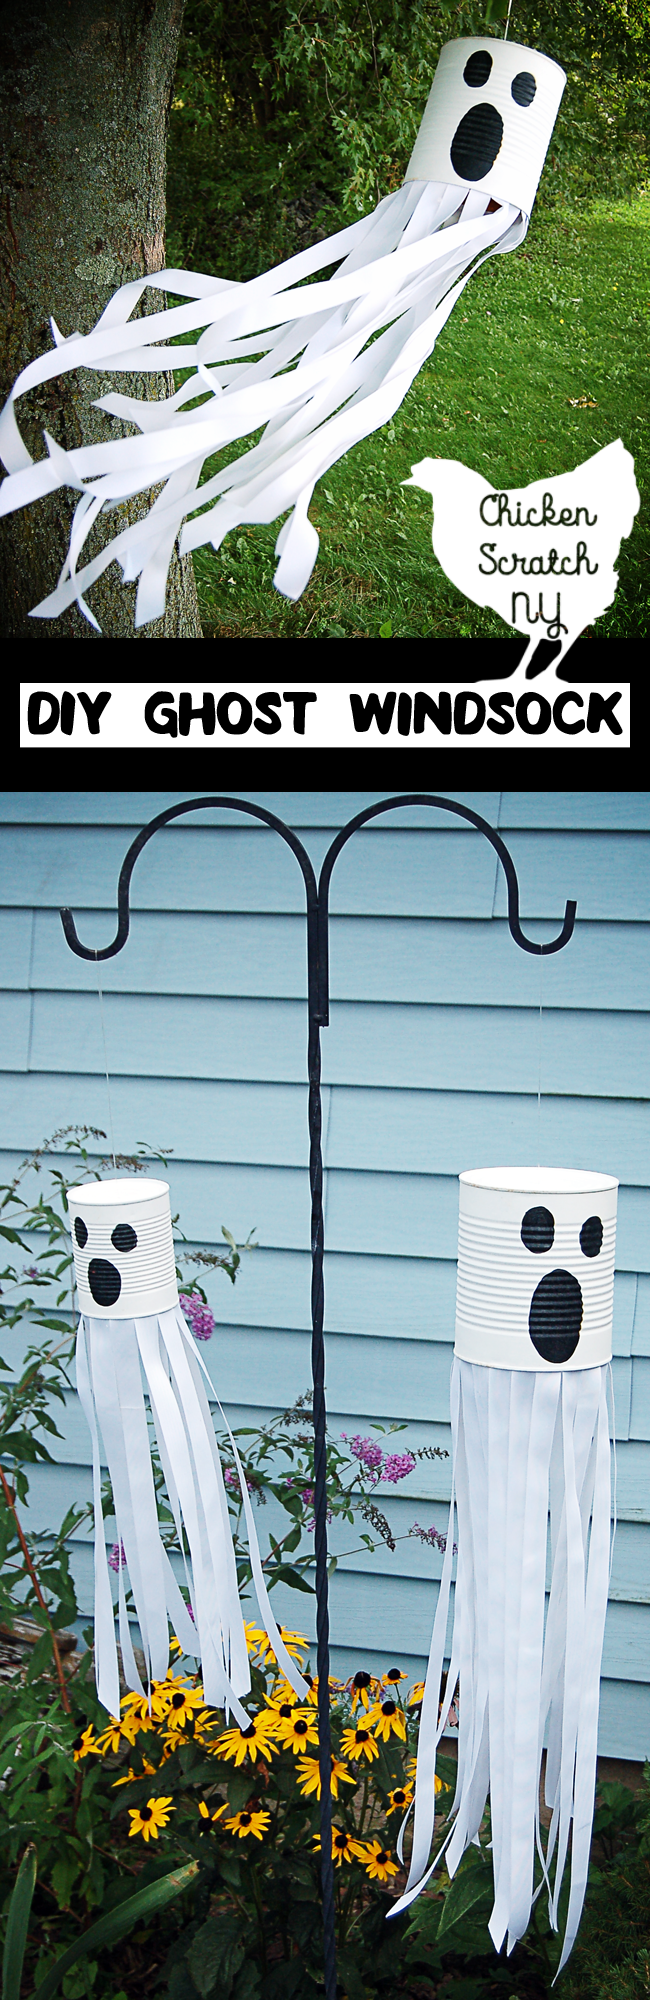 Get ready for Halloween with this DIY tutorial for a ghost windsock with ribbon and paint for a spooky friend straight from the